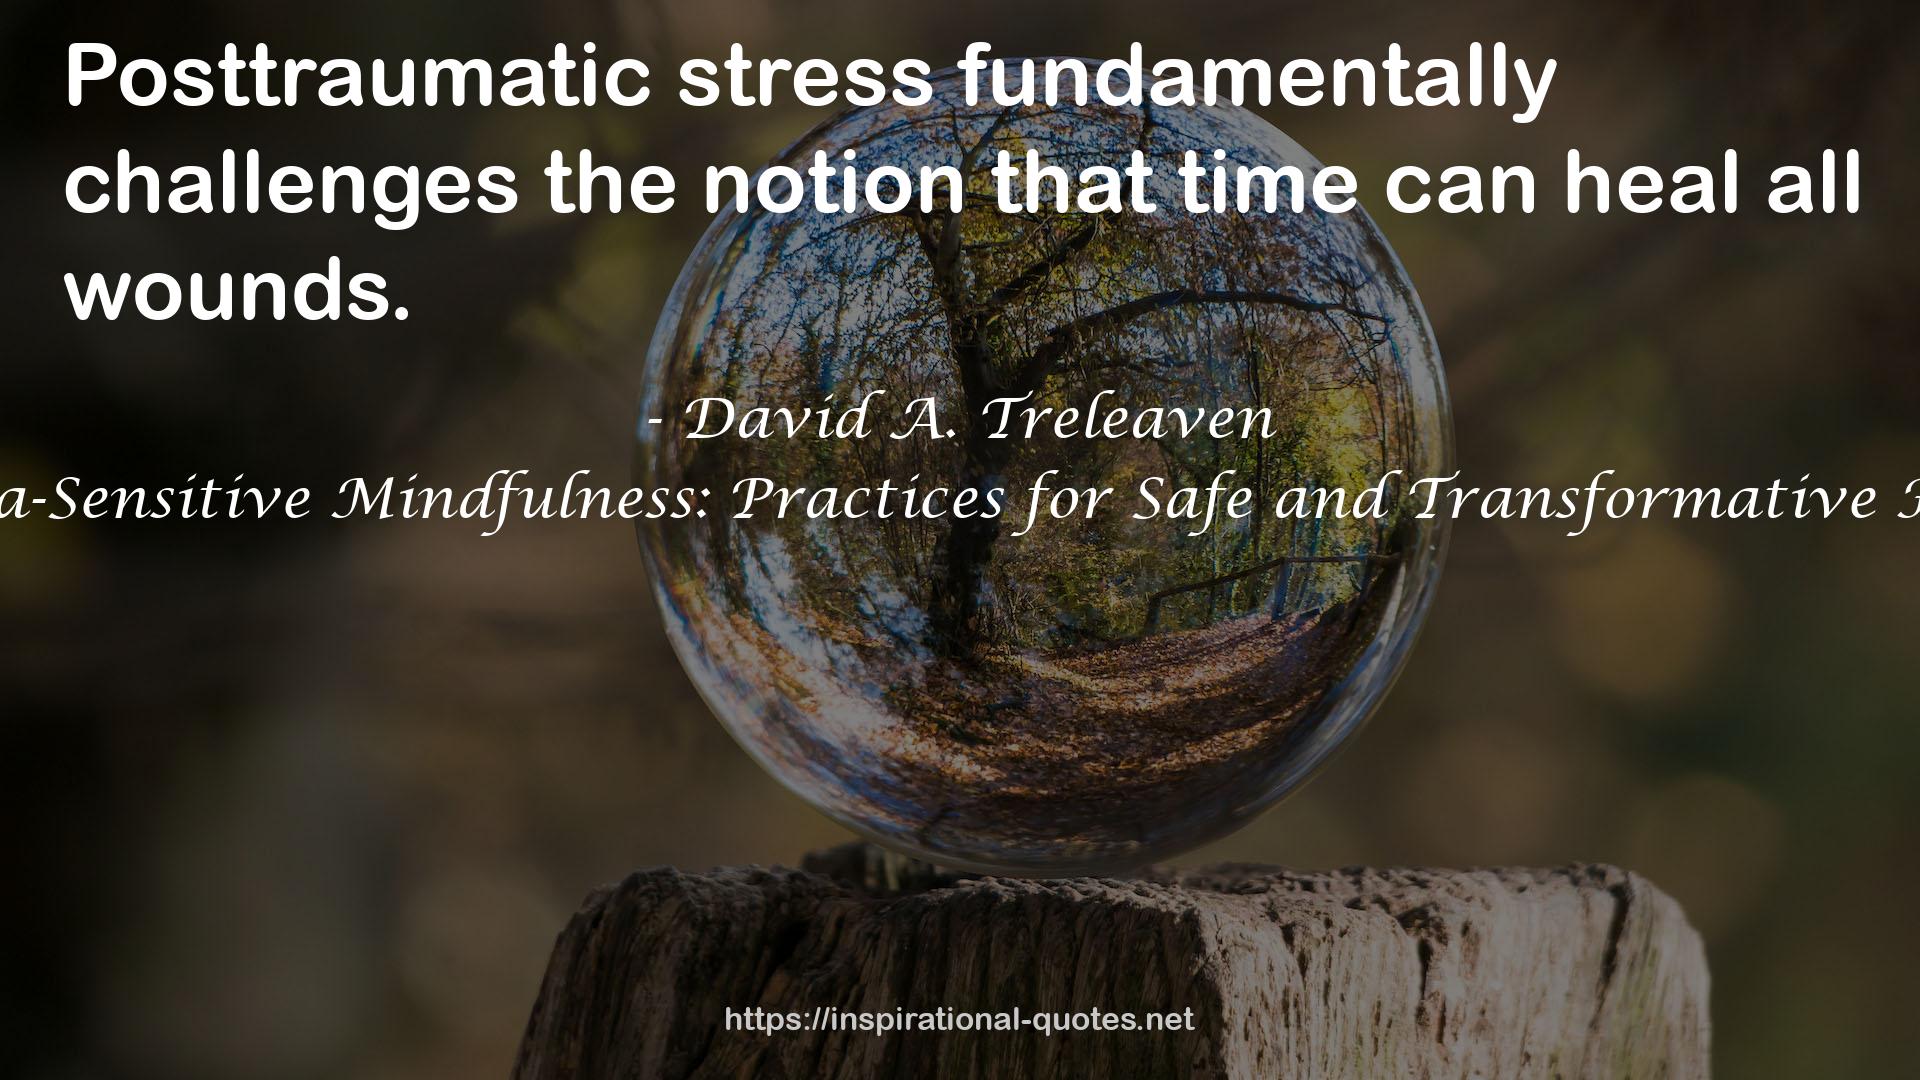 Trauma-Sensitive Mindfulness: Practices for Safe and Transformative Healing QUOTES